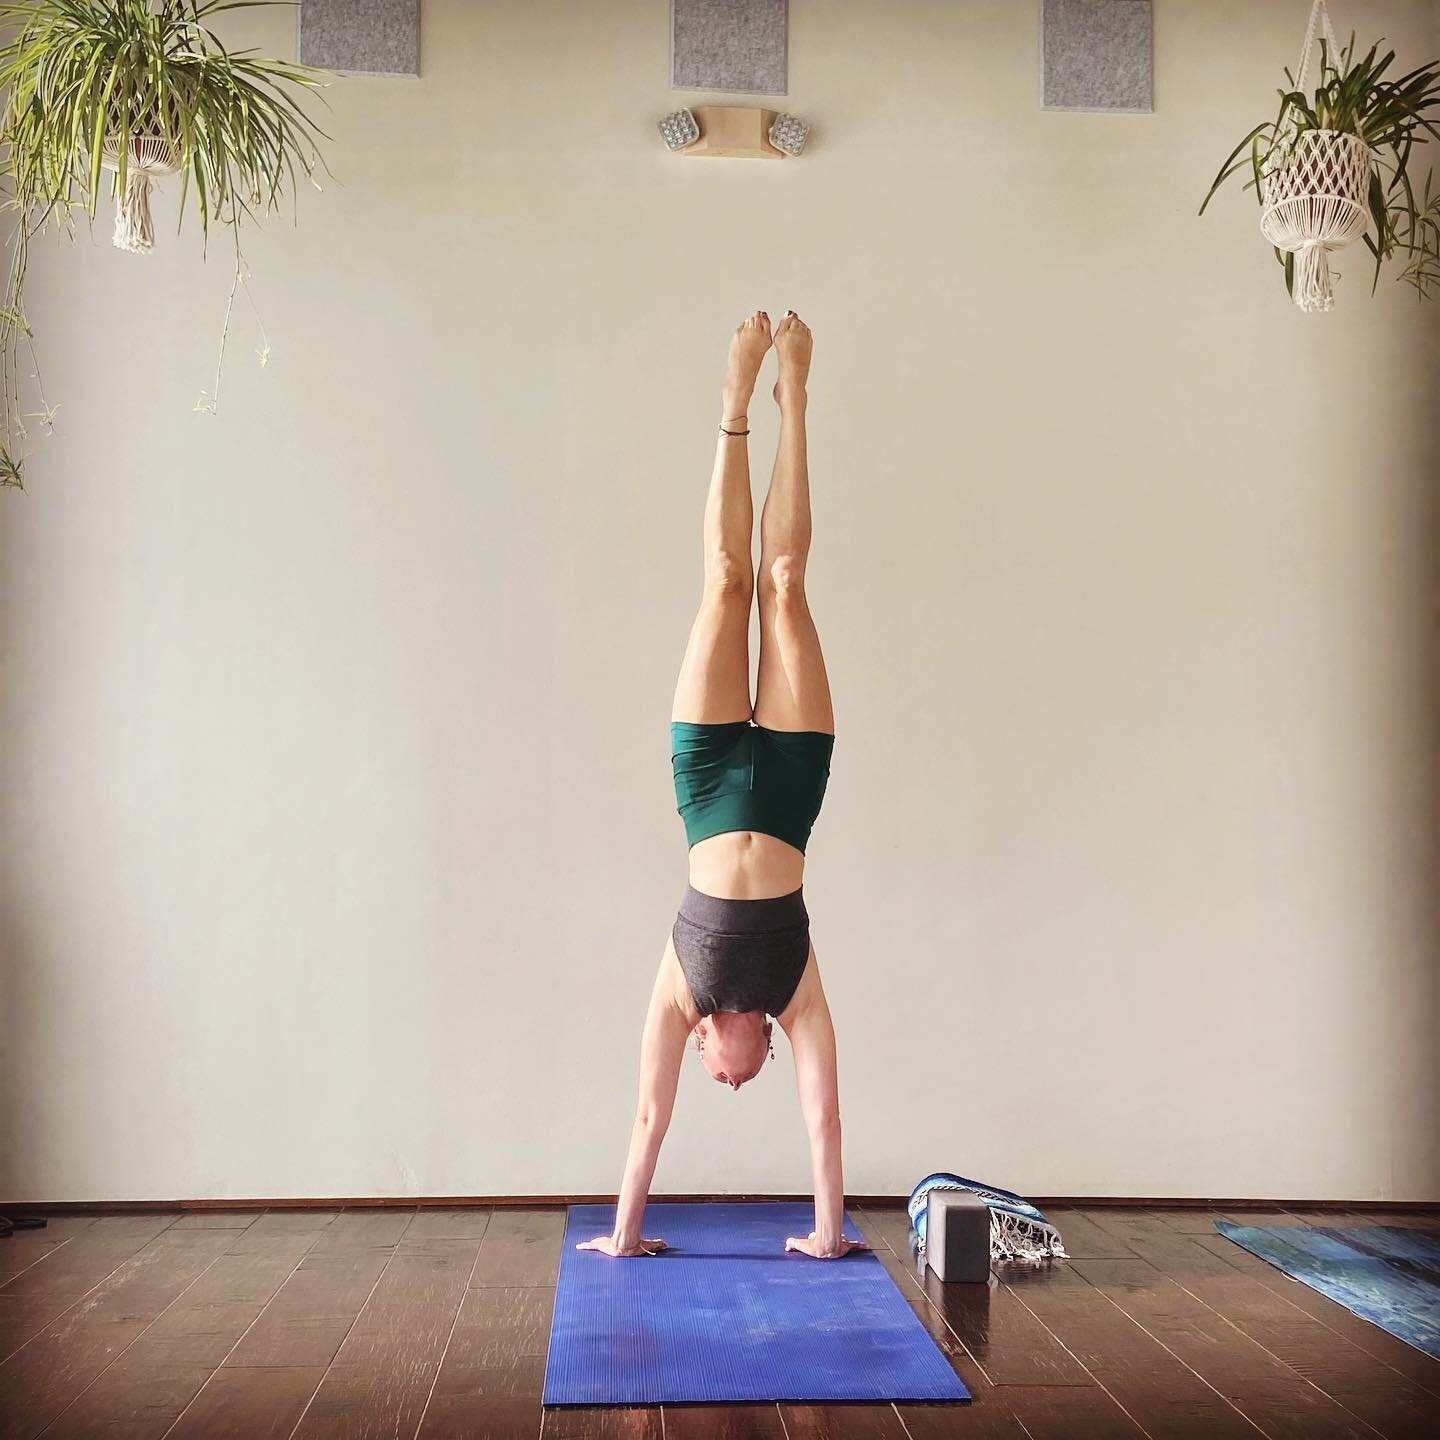 Want to play upside down? 🙃 We have inversion training with a partner as part of our ACROVINYASA workshop on Saturday September 17th &bull; 1-330pm @bodhisaltyoga 🤍 Sign up to join us for some fun, laughter, inversions &amp; acroyoga. I am so excit